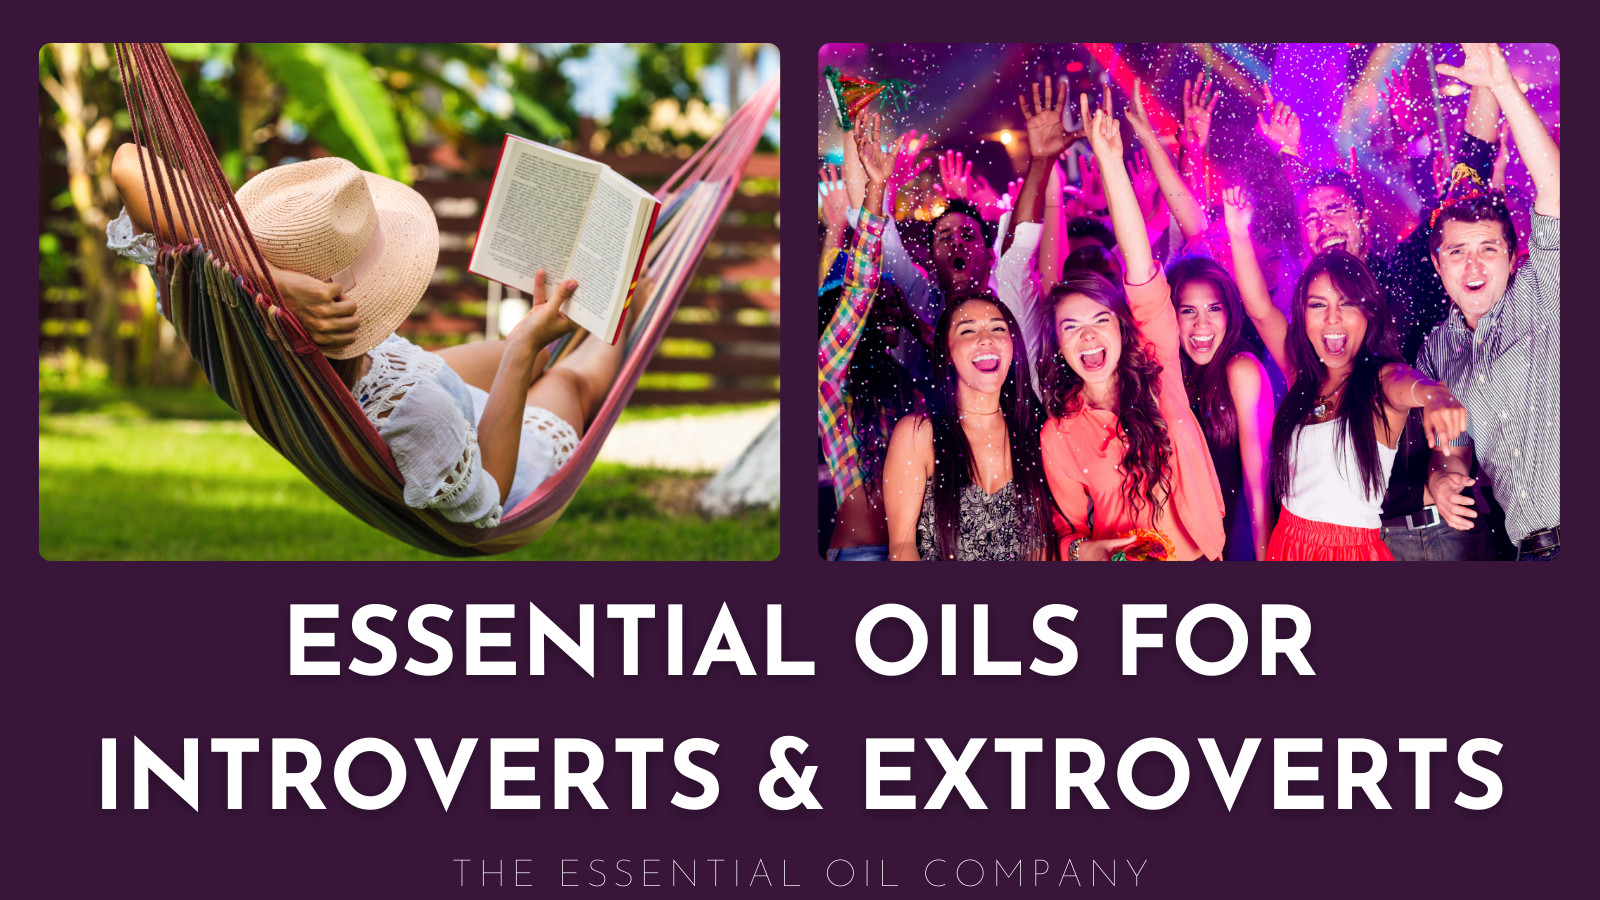 Essential Oils for Introverts & Extroverts